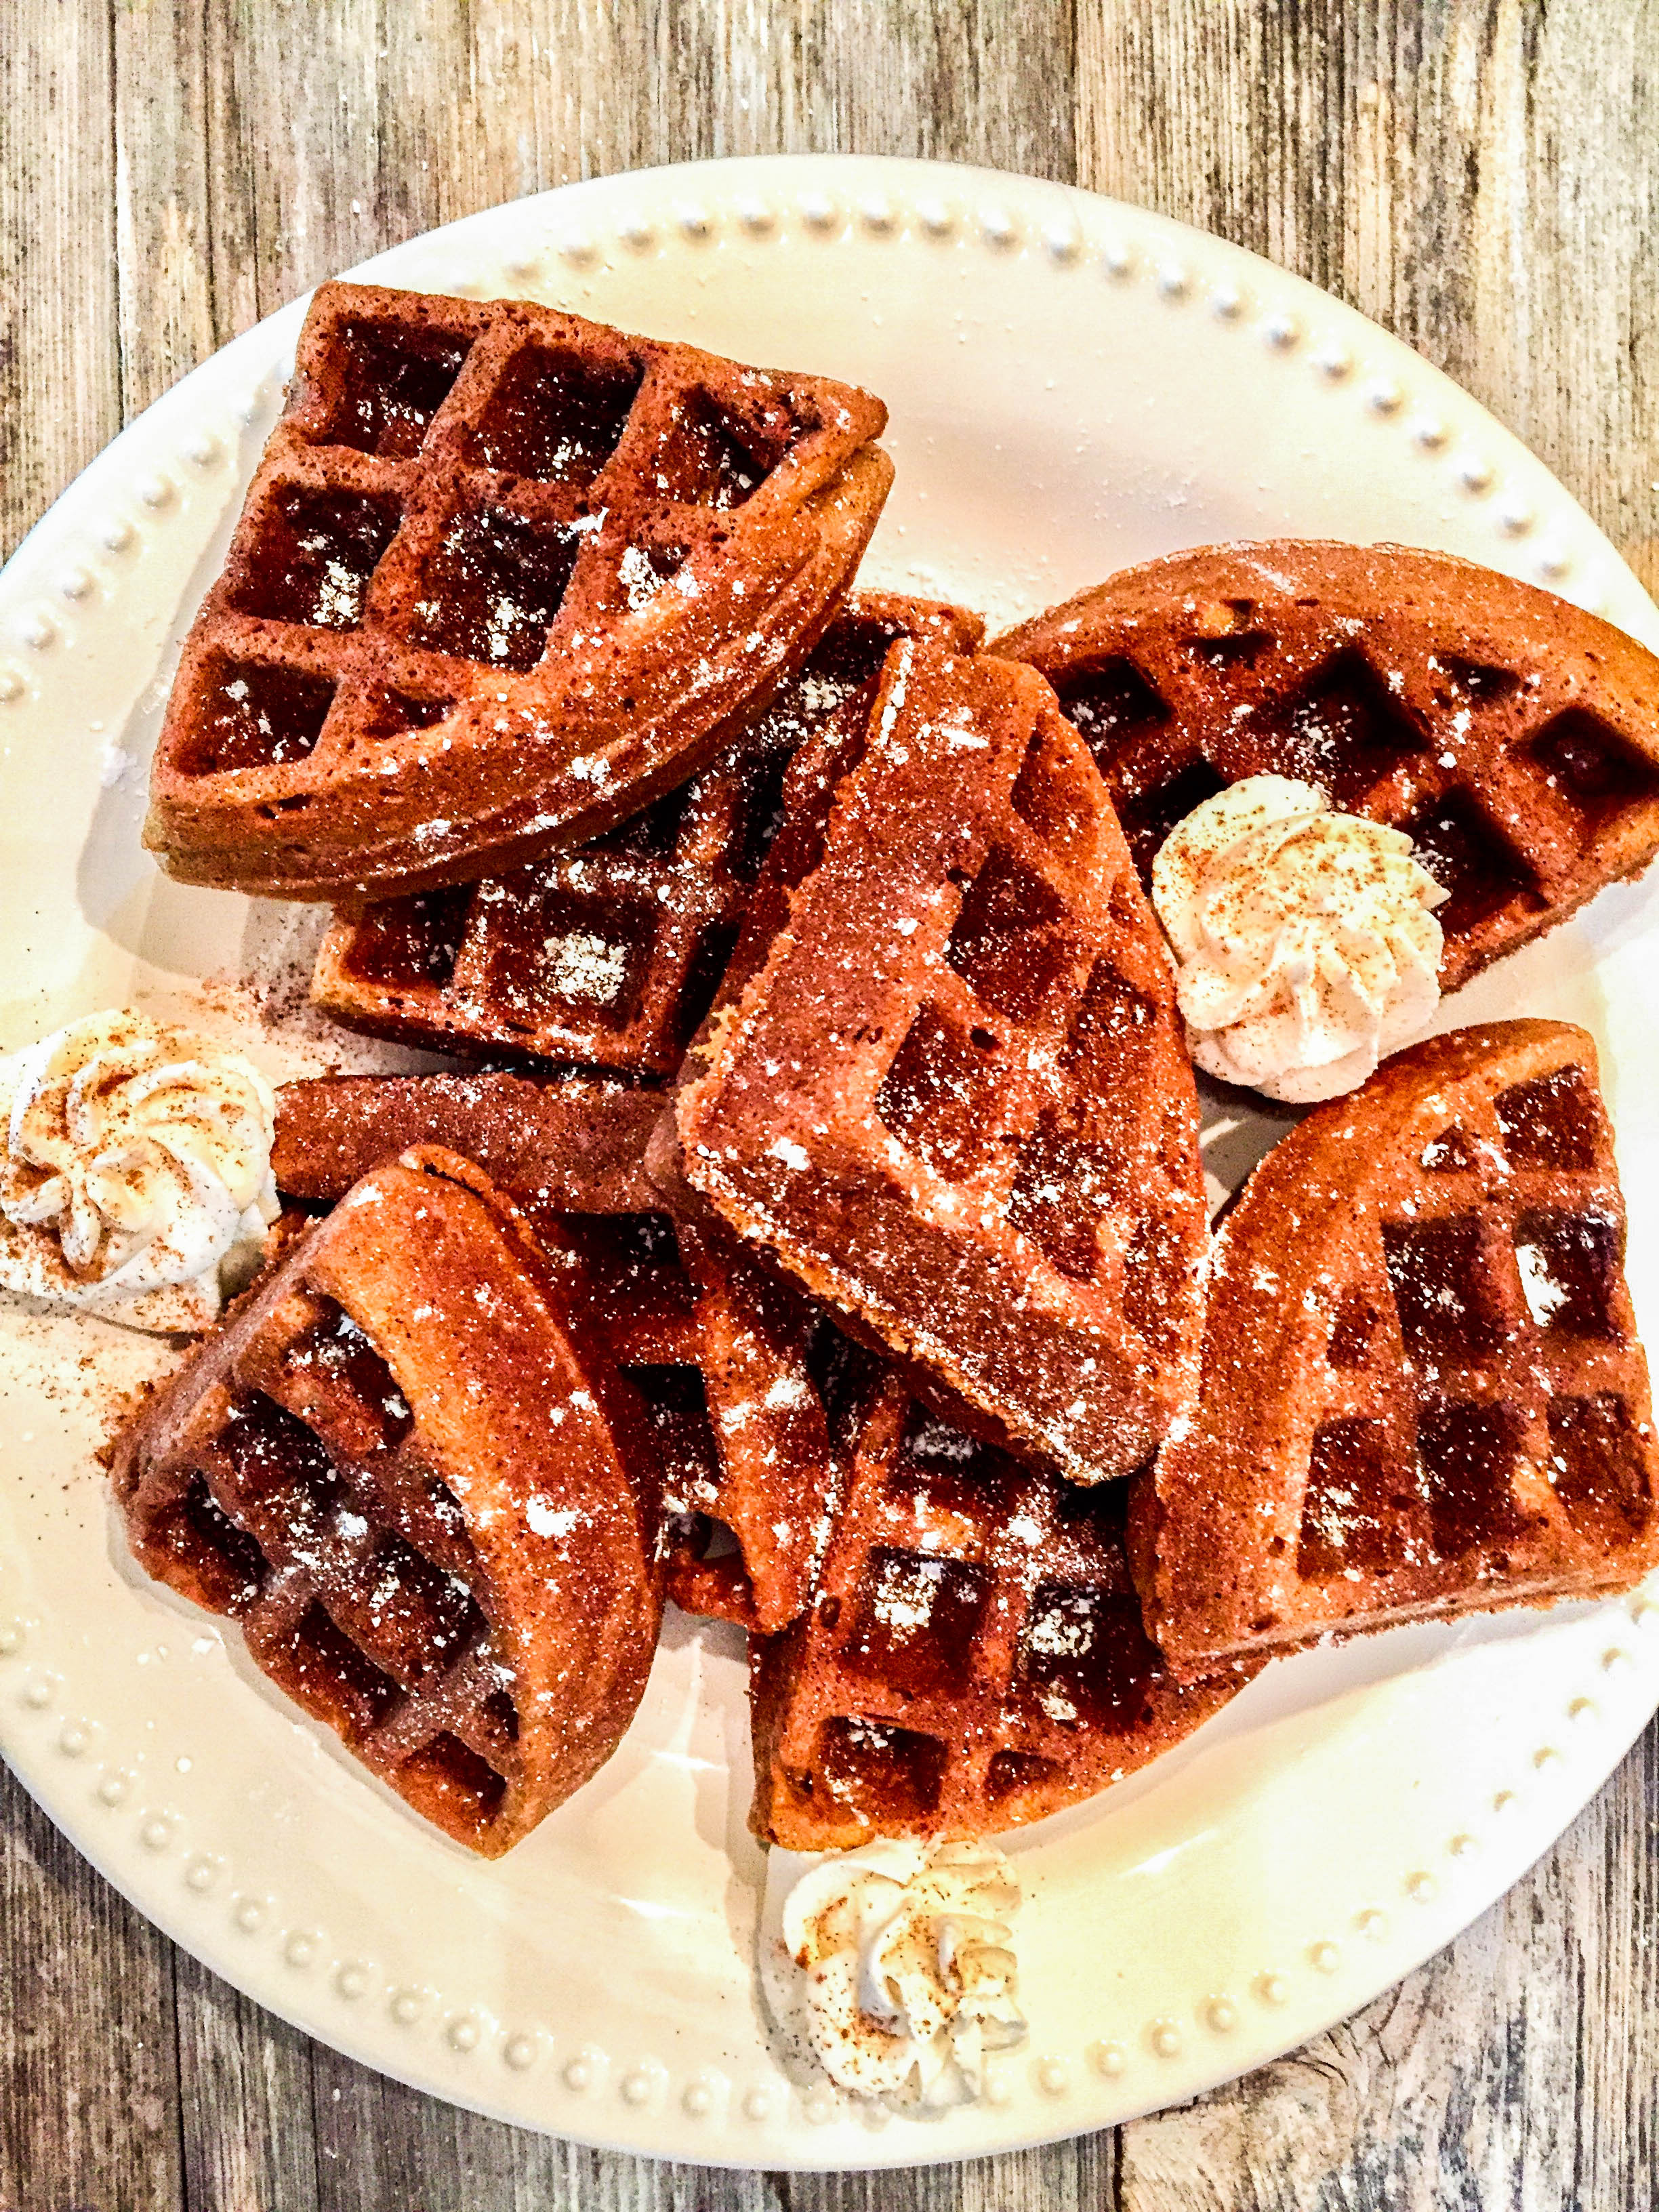 http://ahintofwine.com/wp-content/uploads/2016/12/Gingerbread-Waffles-with-Cinnamon-Whipped-Cream.jpg